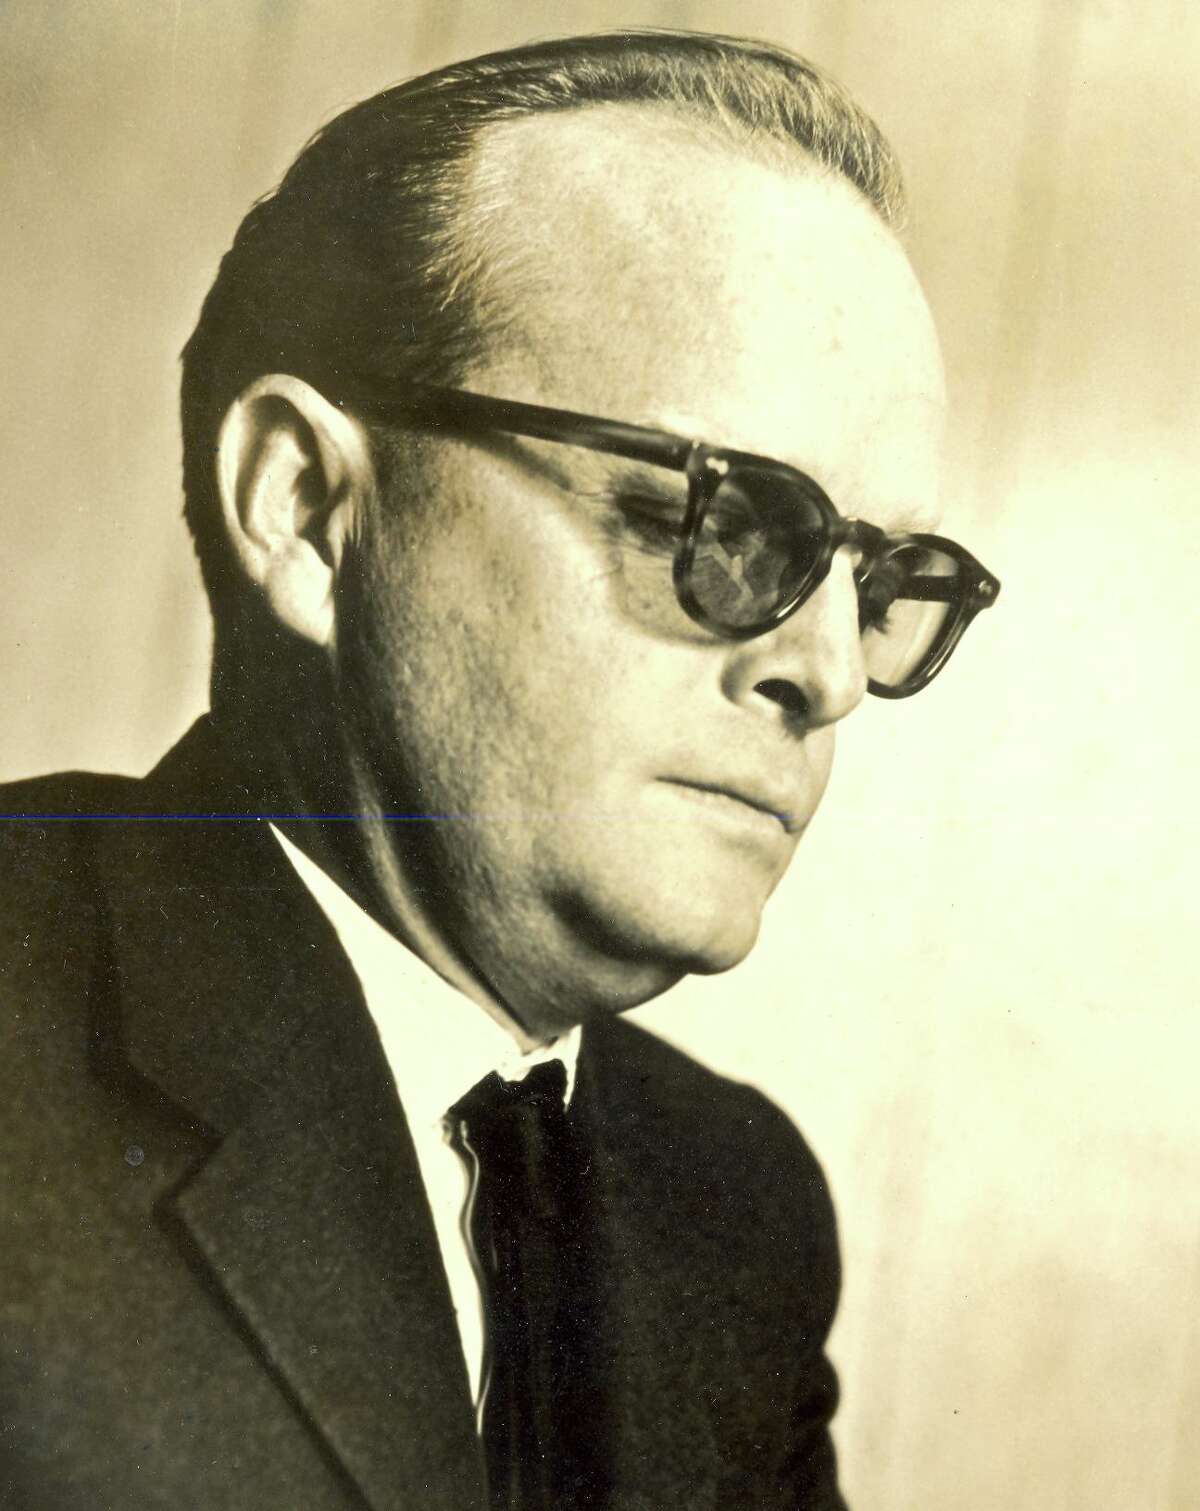 Truman Capote is seen in this undated photo provided by the Greenwich Historical Society. Capote lived in Greenwich in his younger days, attending Greenwich High School from 1939 to 1941.